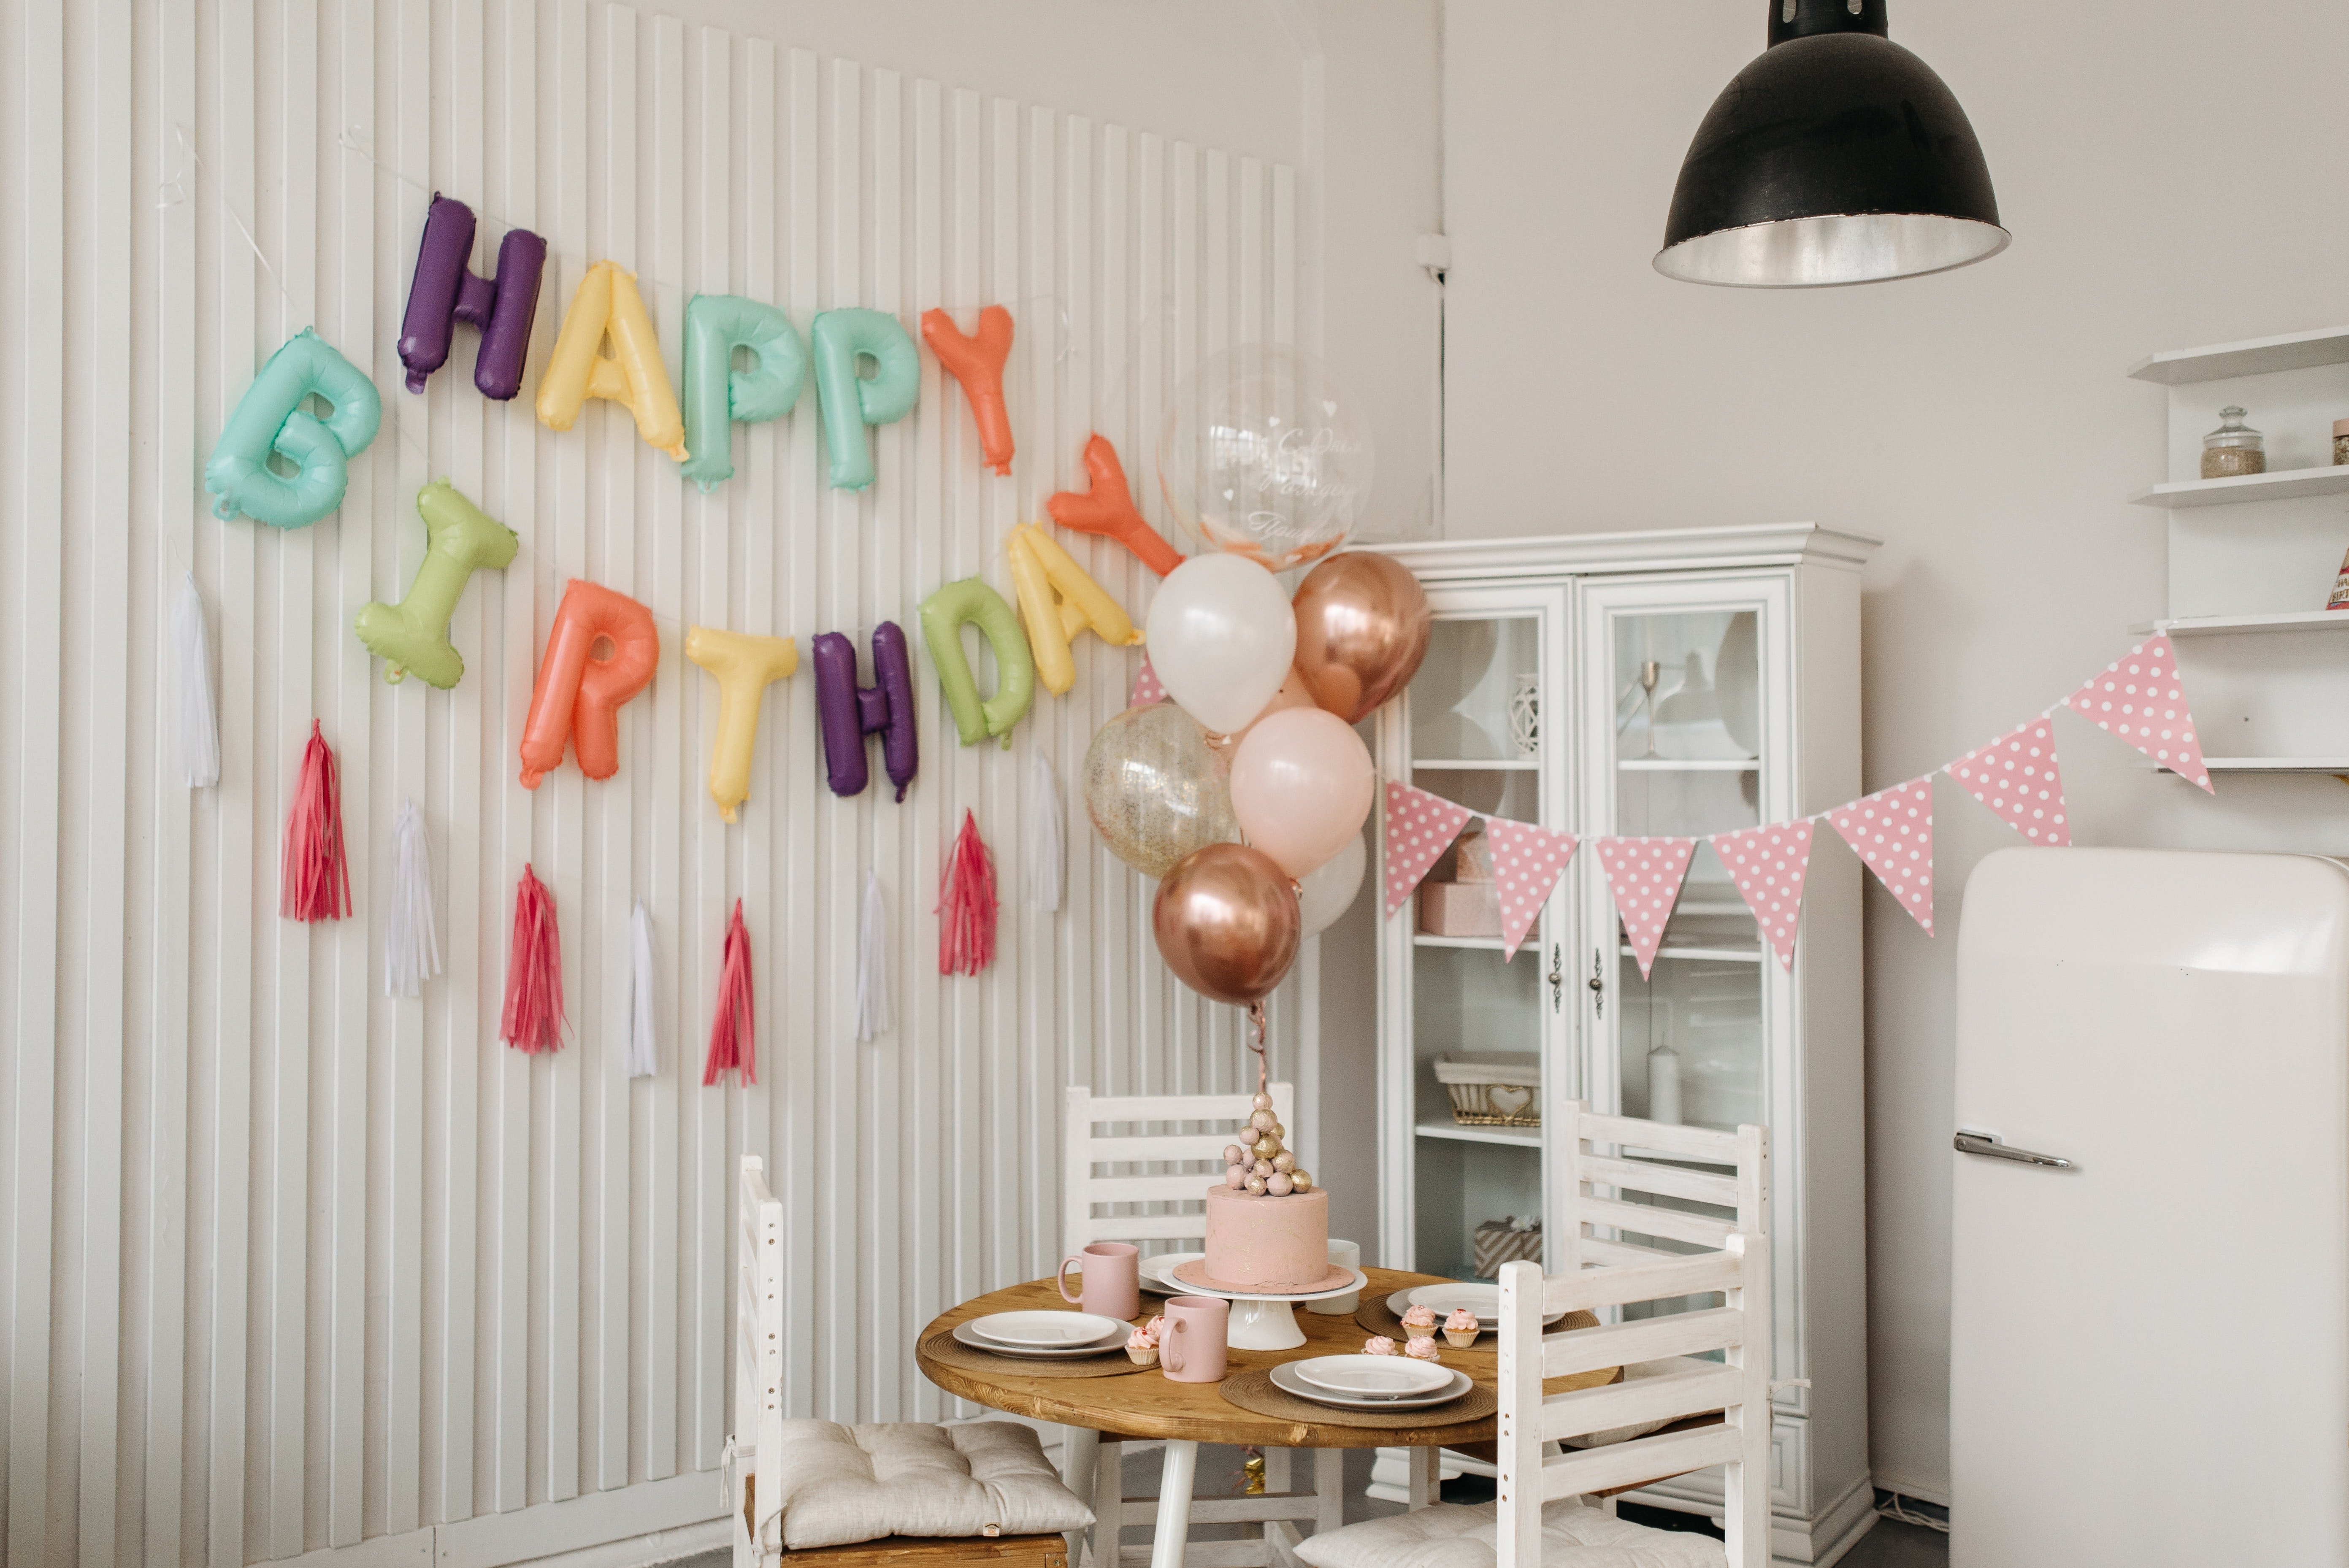 Shannon and Martin had organized a birthday party for Justin and Lucas | Photo: Pexels